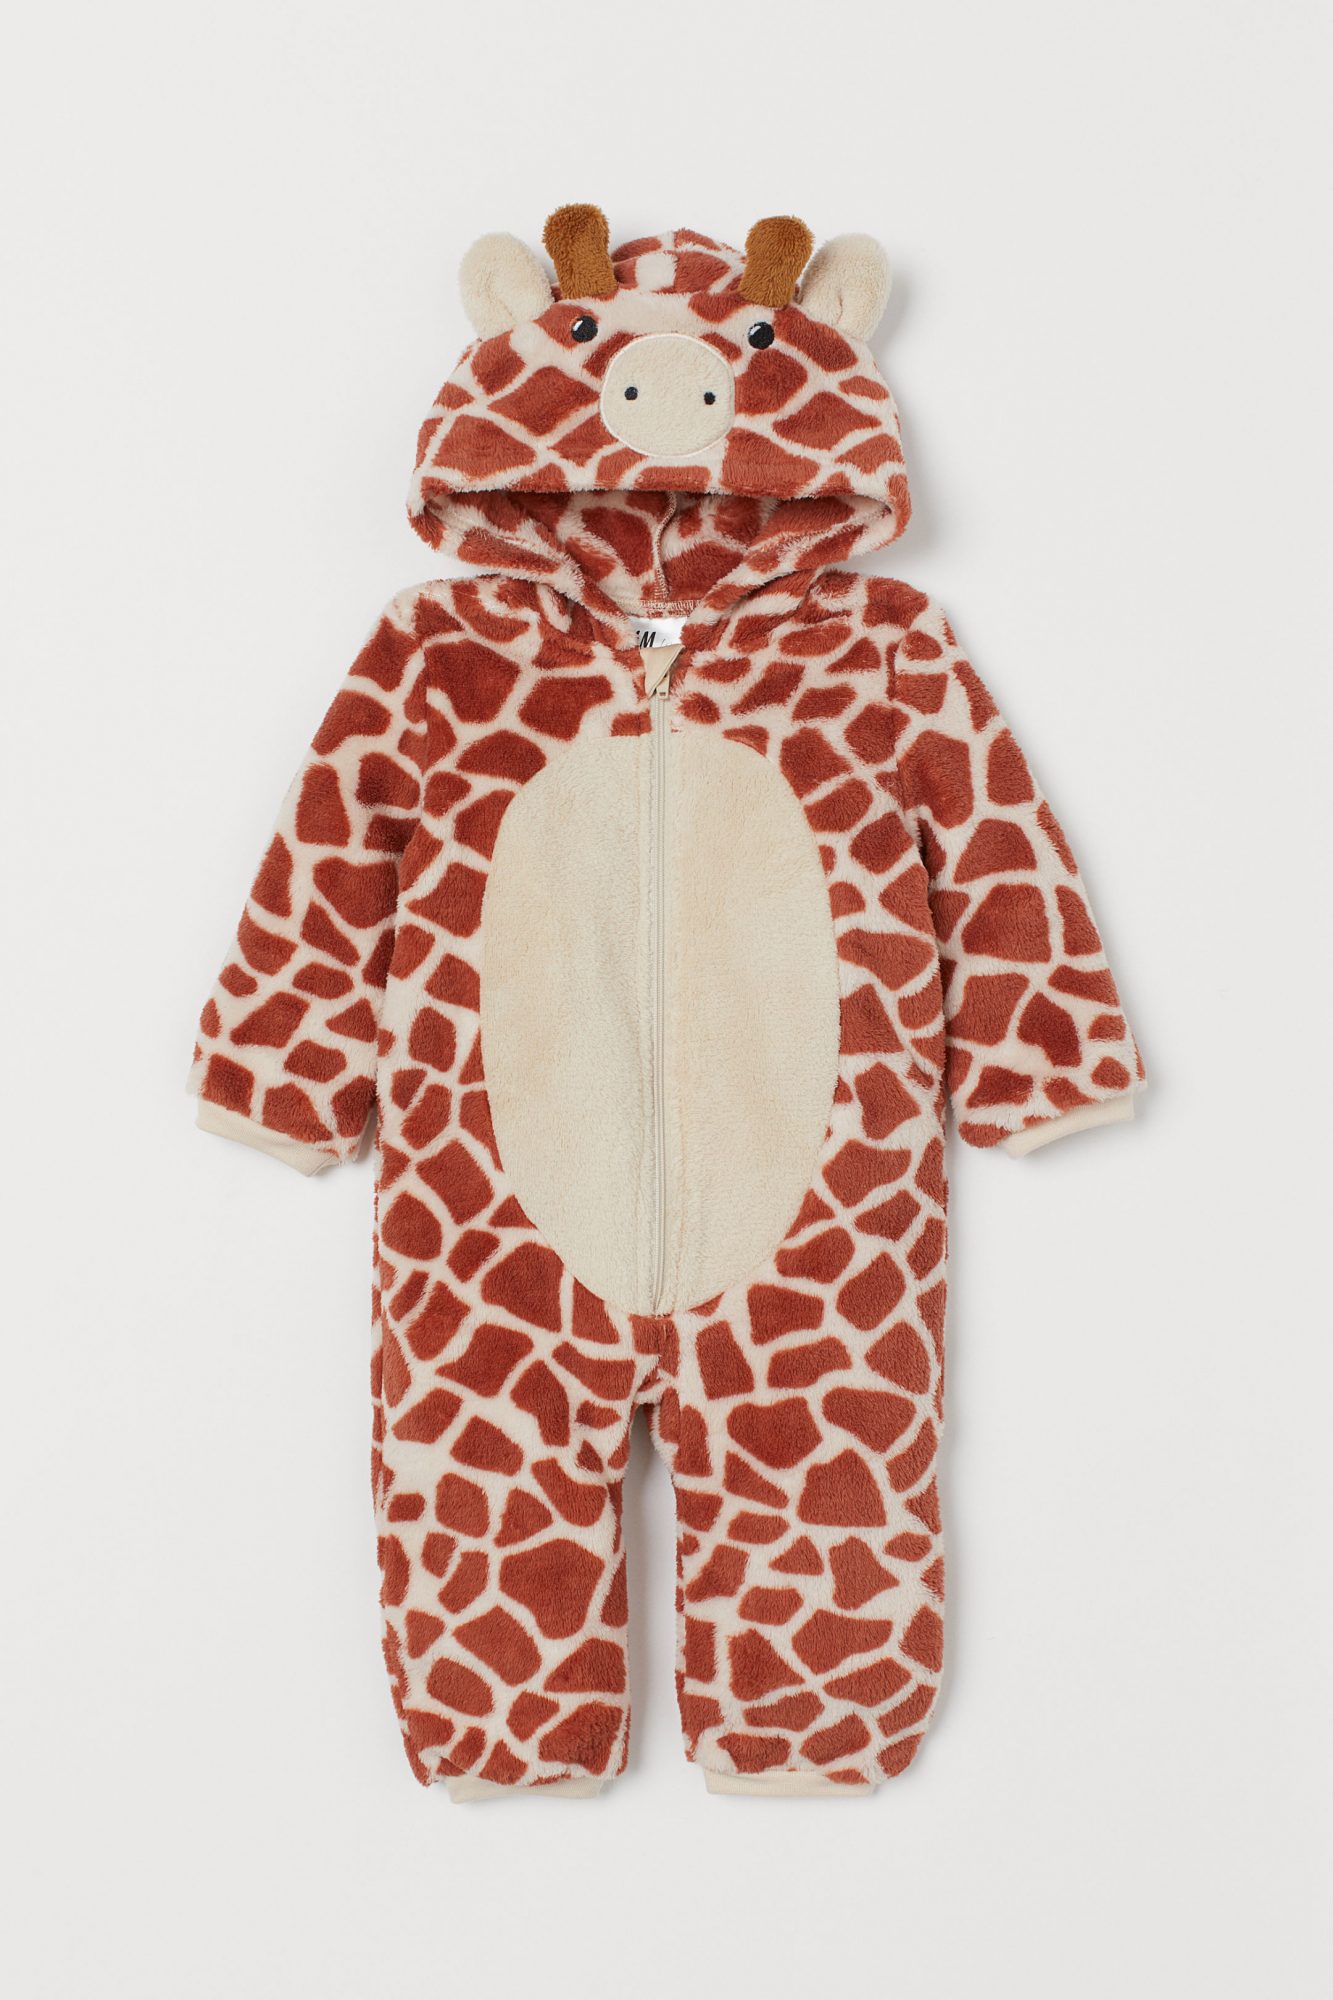 h&m affordable giraffe halloween costume for babies